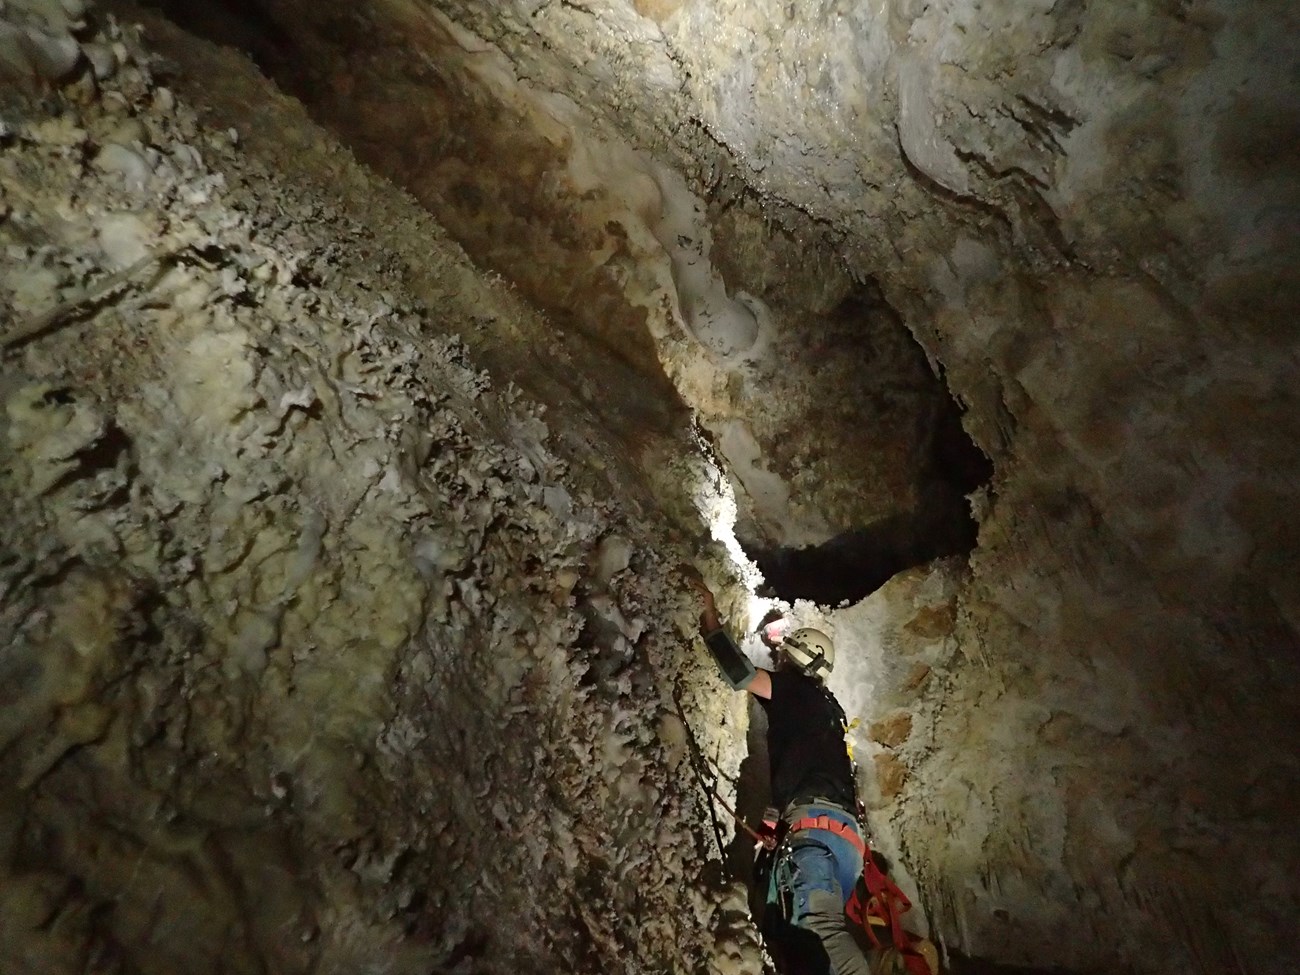 a person climbing up a cave passage